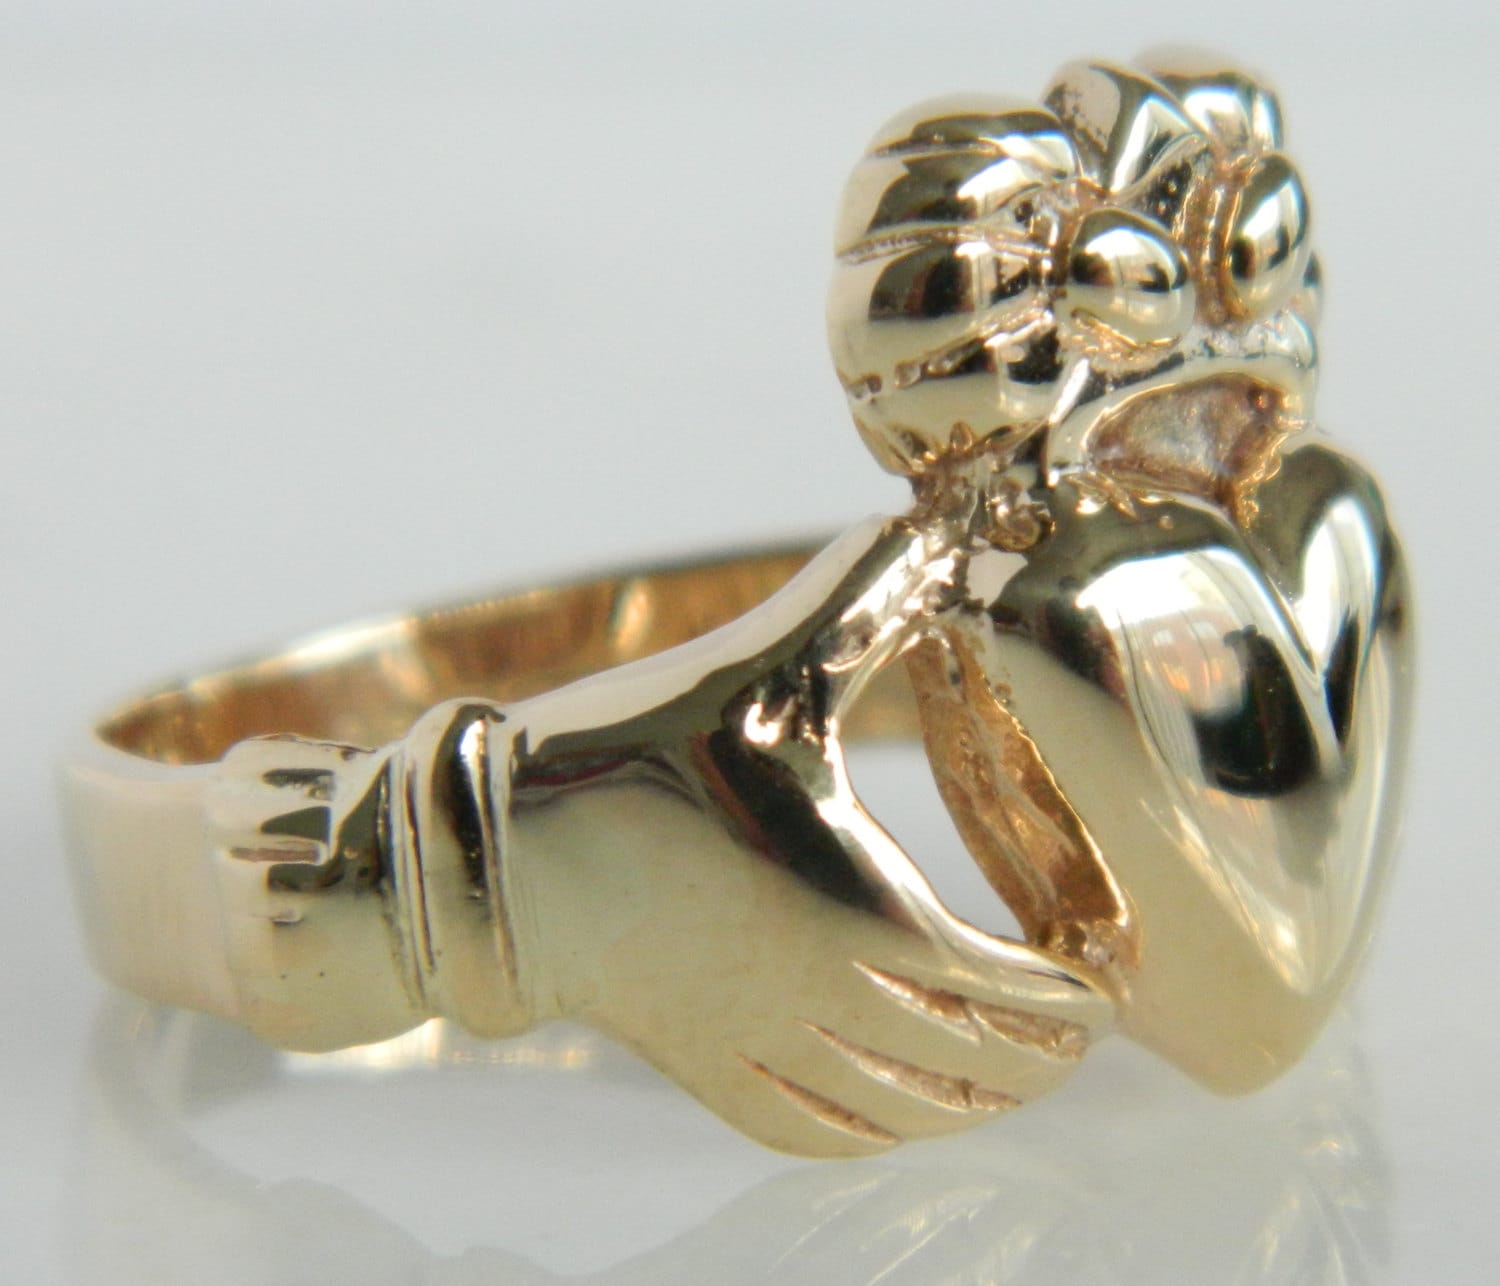 Made In Ireland Authentic Vintage Irish Claddagh Ring 9K Gold